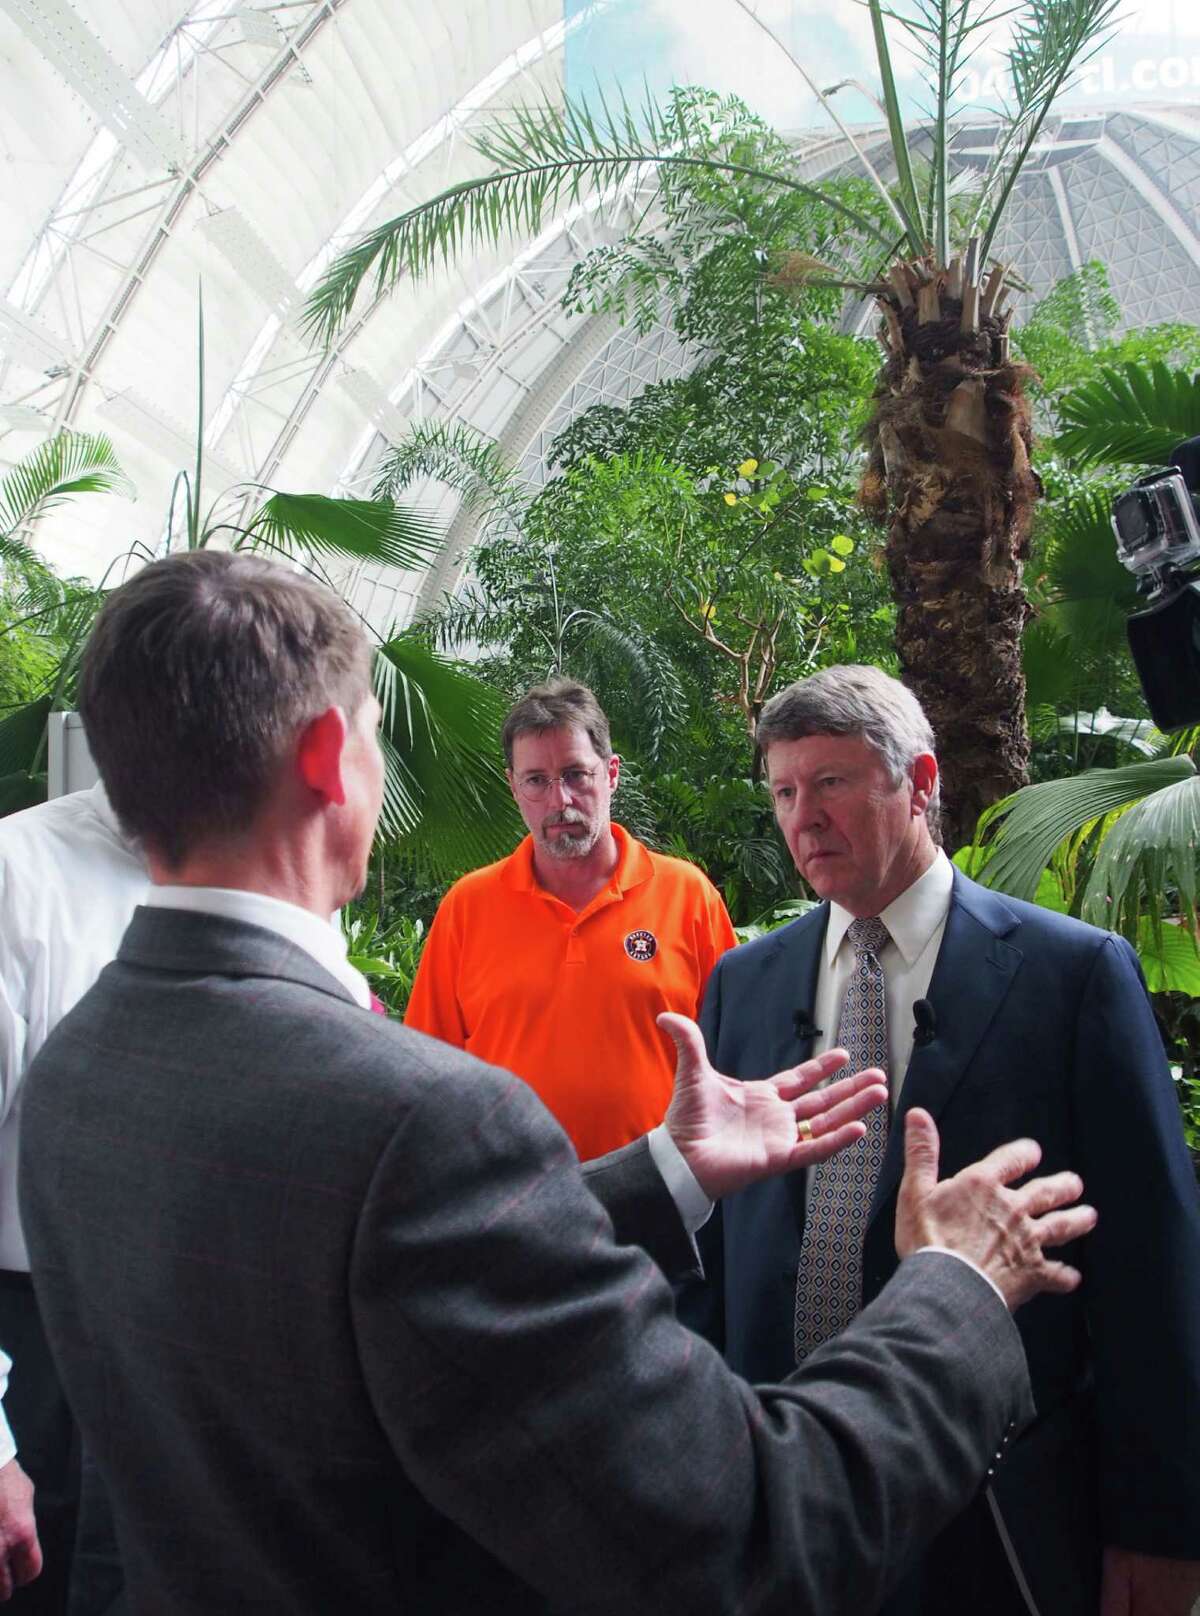 Philipp Amstutz, left,Tropical Islands director of operations, talks with Judge Ed Emmett, Harris County’s highest elected official, right, and Harris County director of communications Joe Stinebaker, center, in Brand, near Berlin, Germany, Monday, May 4, 2015, at the Tropical Islands, where ambitious entrepreneurs planned to revive Germany's zeppelin industry. A delegation from Texas toured the facility to see if lessons learned by the Germans can be applied to converting the Houston Astrodome _ the world's first multi-purposed domed stadium, which hasn't been home to a sports team since 1999 and has been closed to all events since 2009. (AP Photo/David Rising)